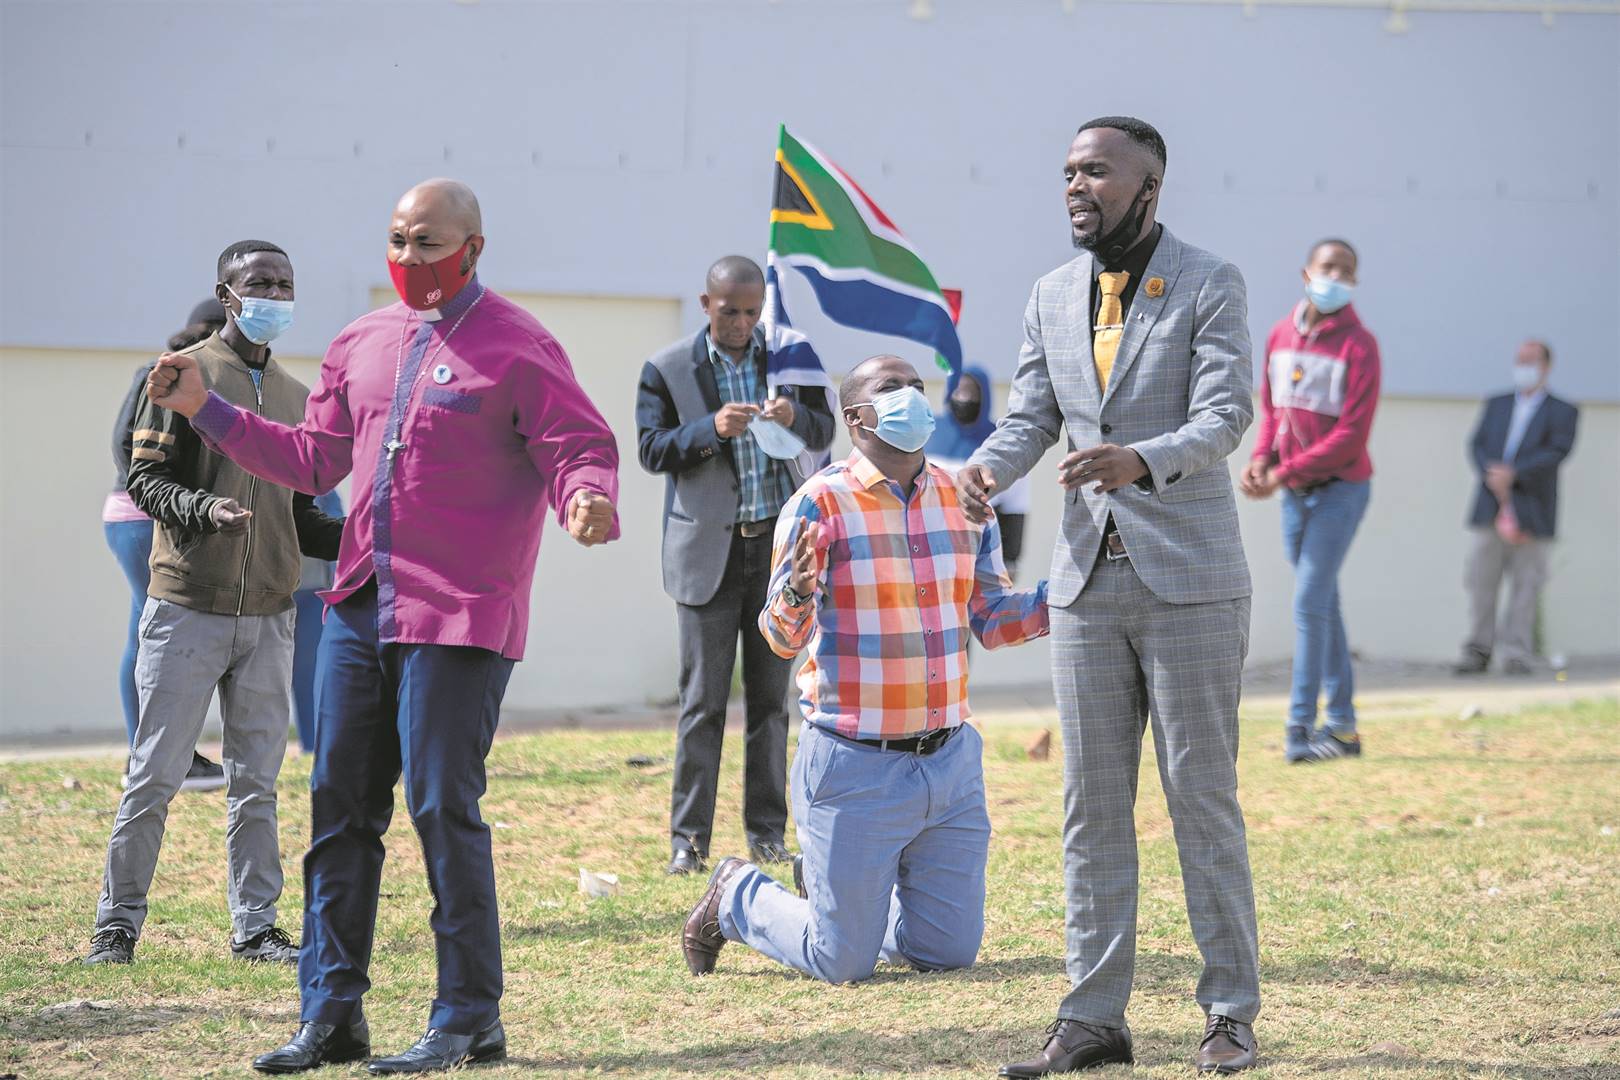 Members of the Pastors Against Church Closures movement marched to Parliament to hand over grievances with regard to 50% church occupancy rules during lockdown. Photo: Jaco Marais/File